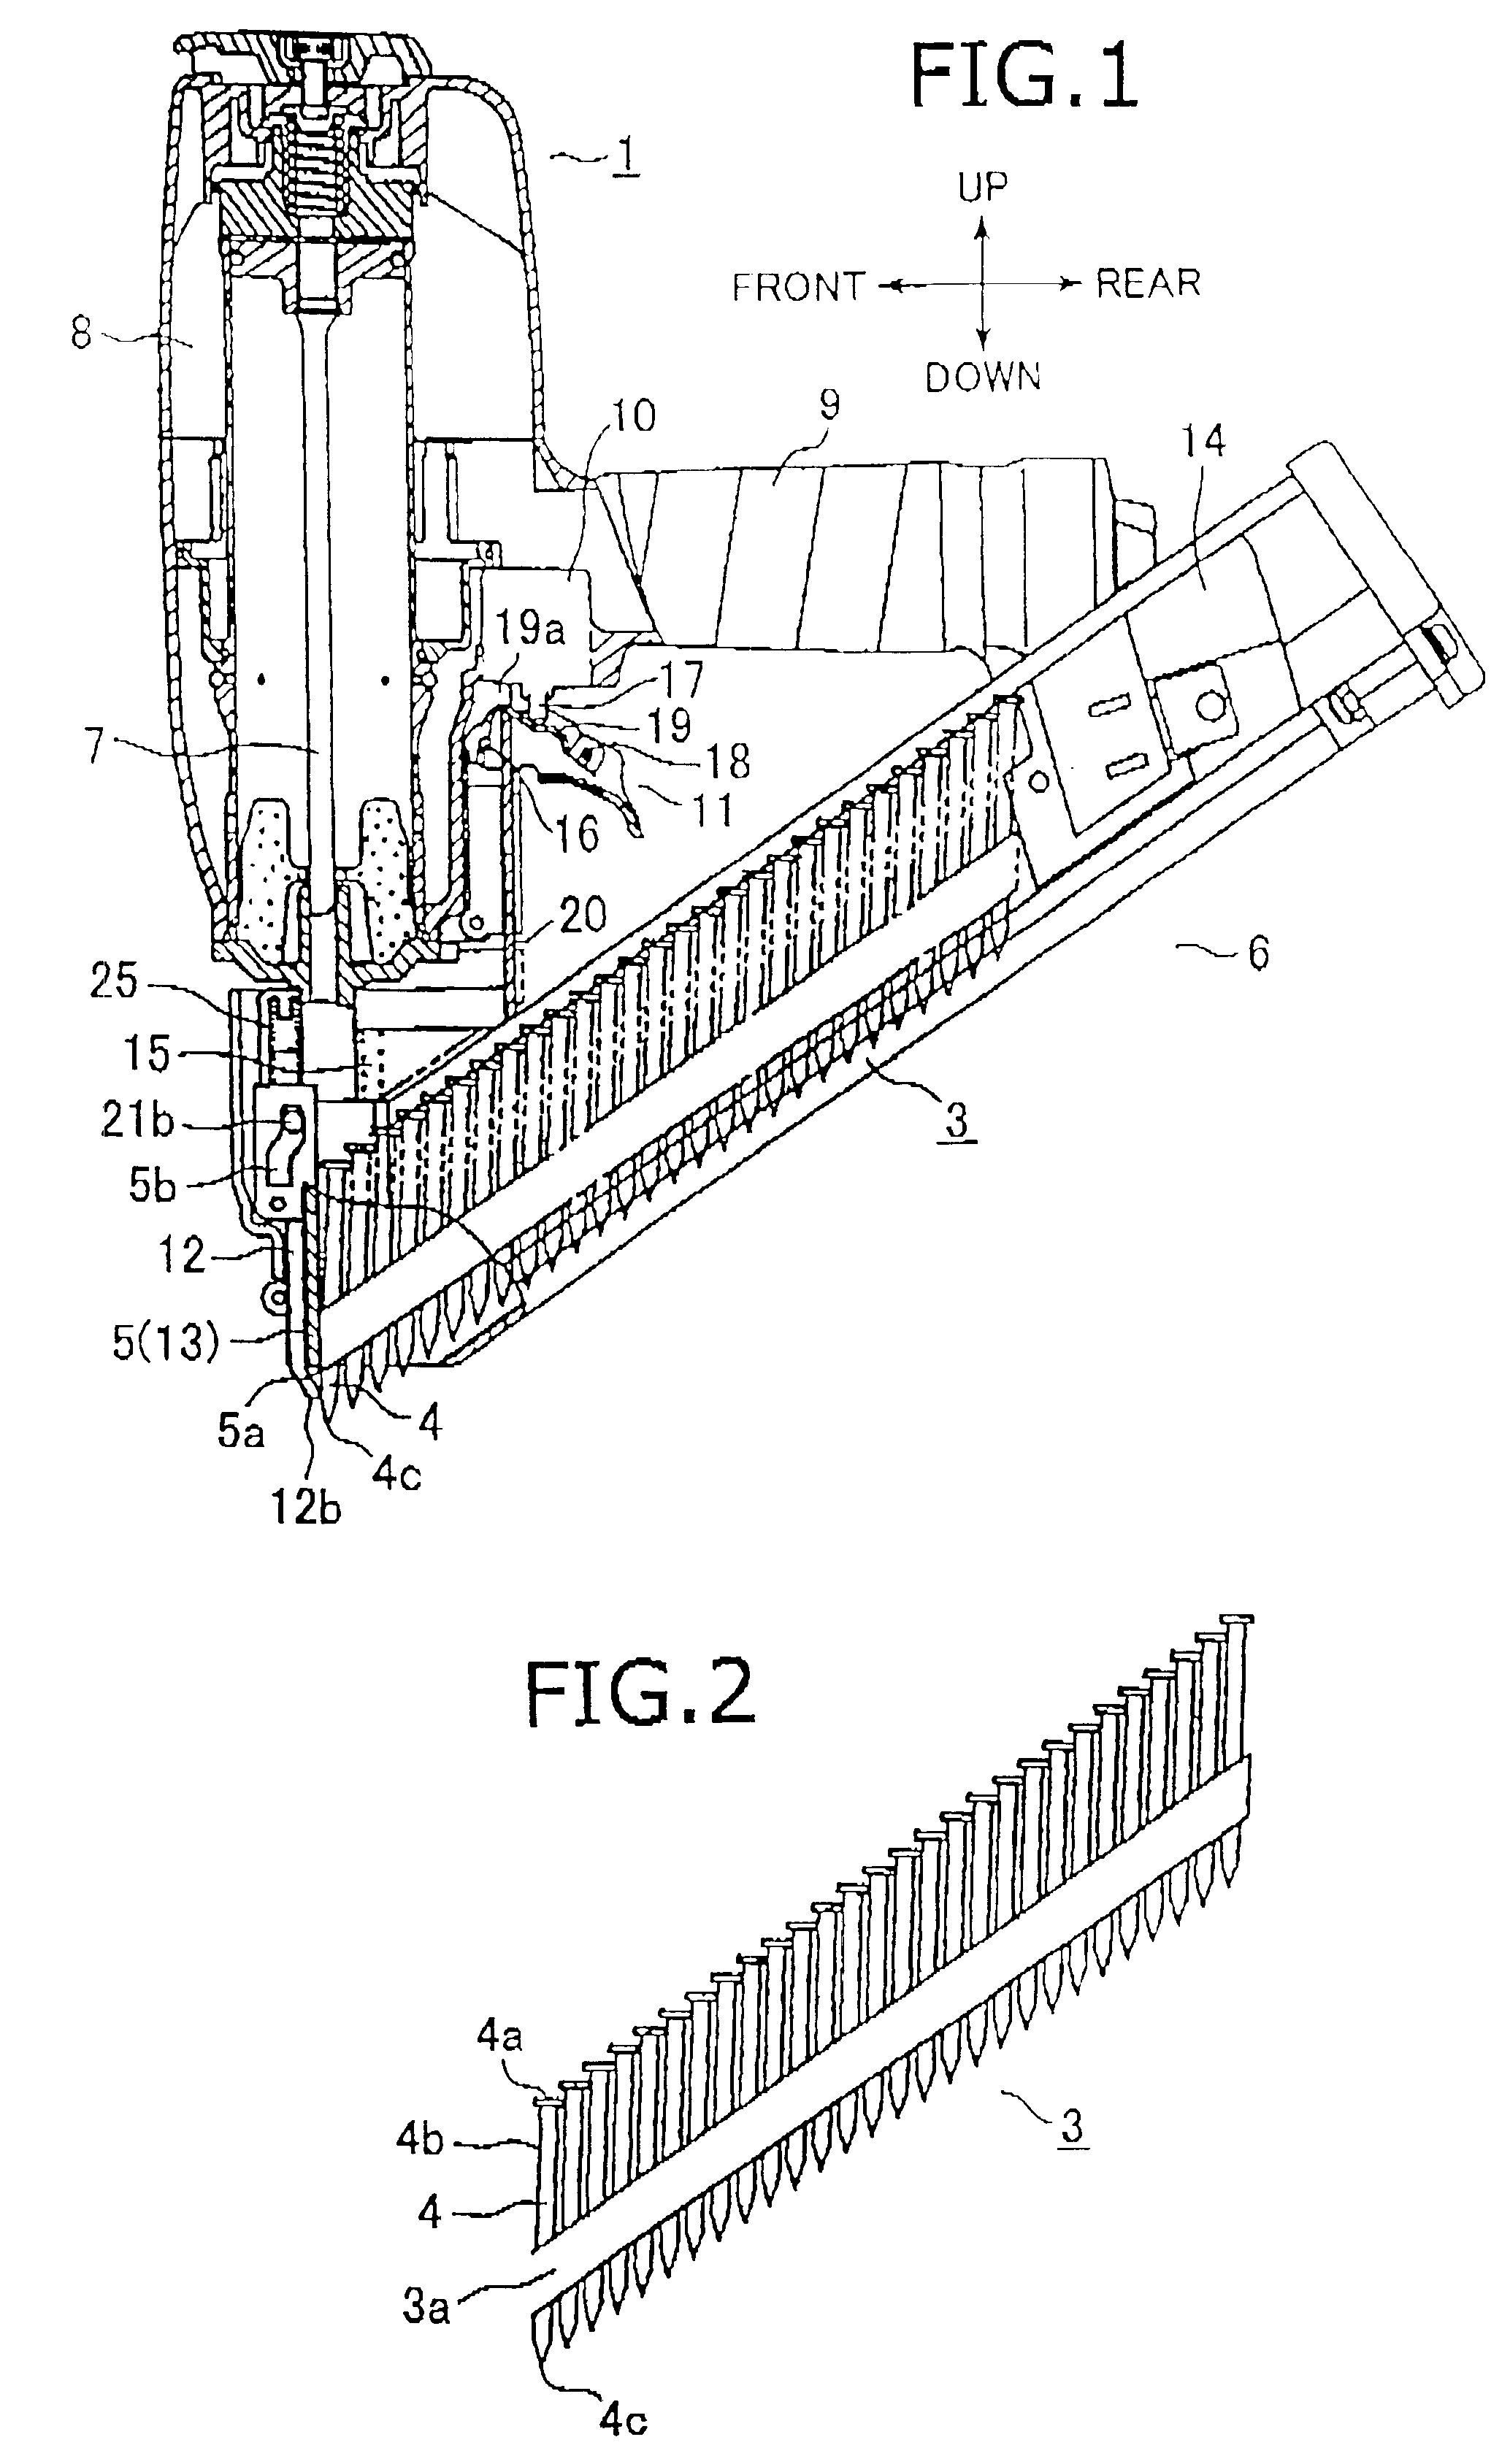 Nail gun with safety portion mechanism for preventing misfires